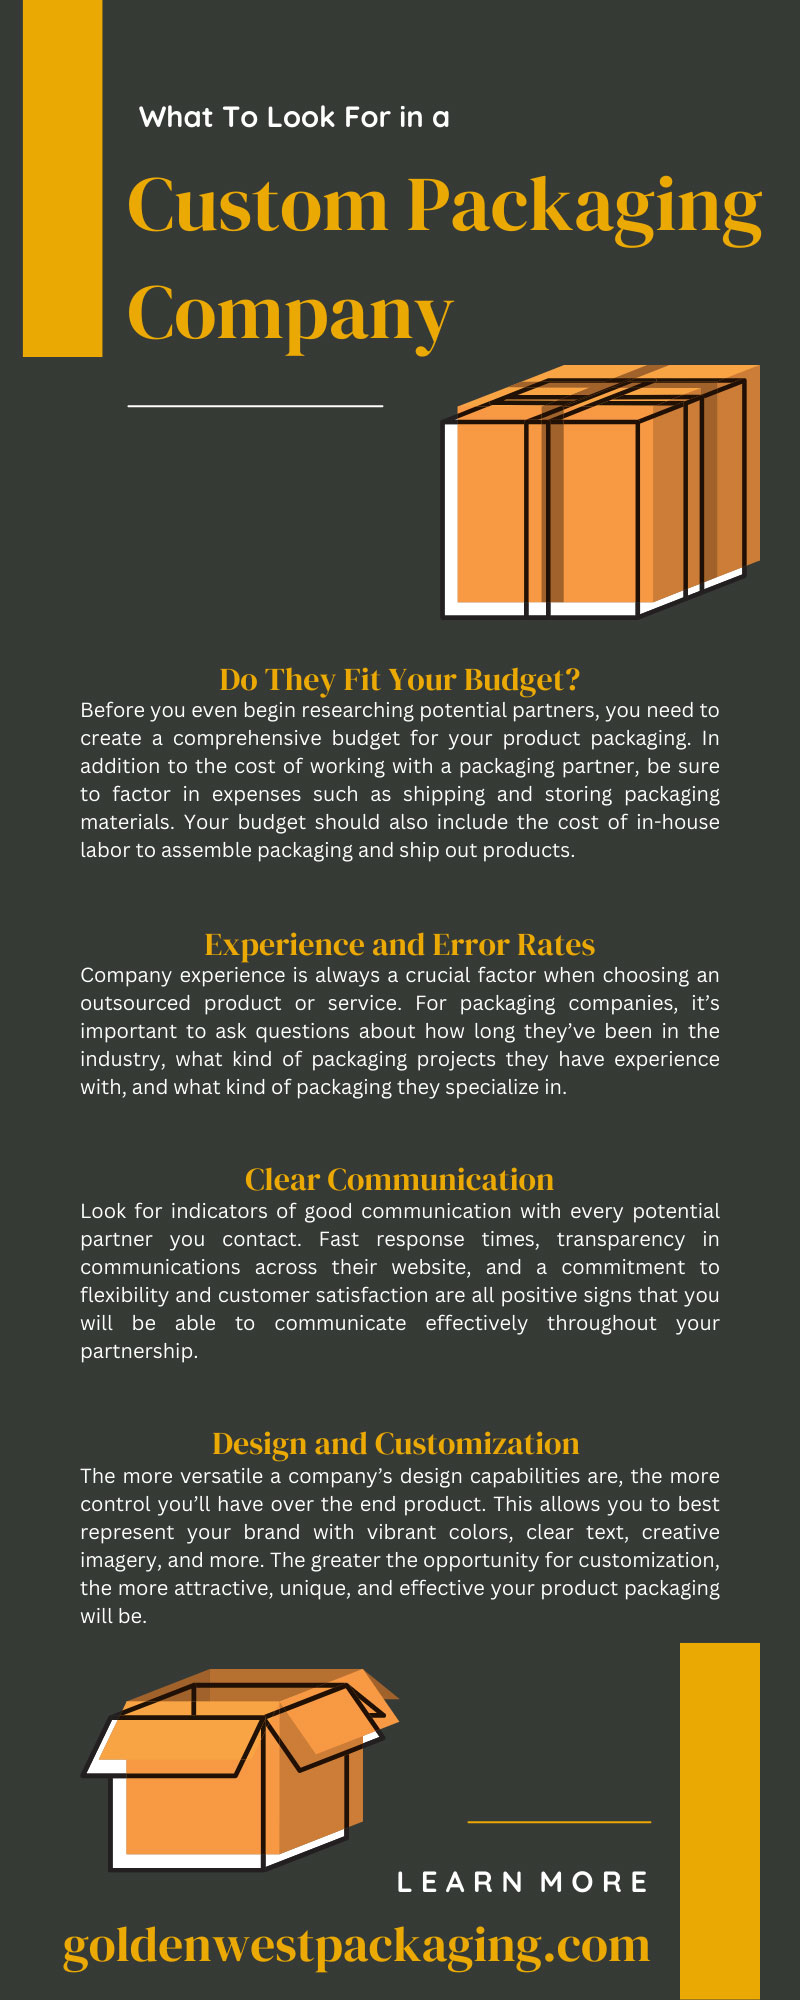 What To Look For in a Custom Packaging Company